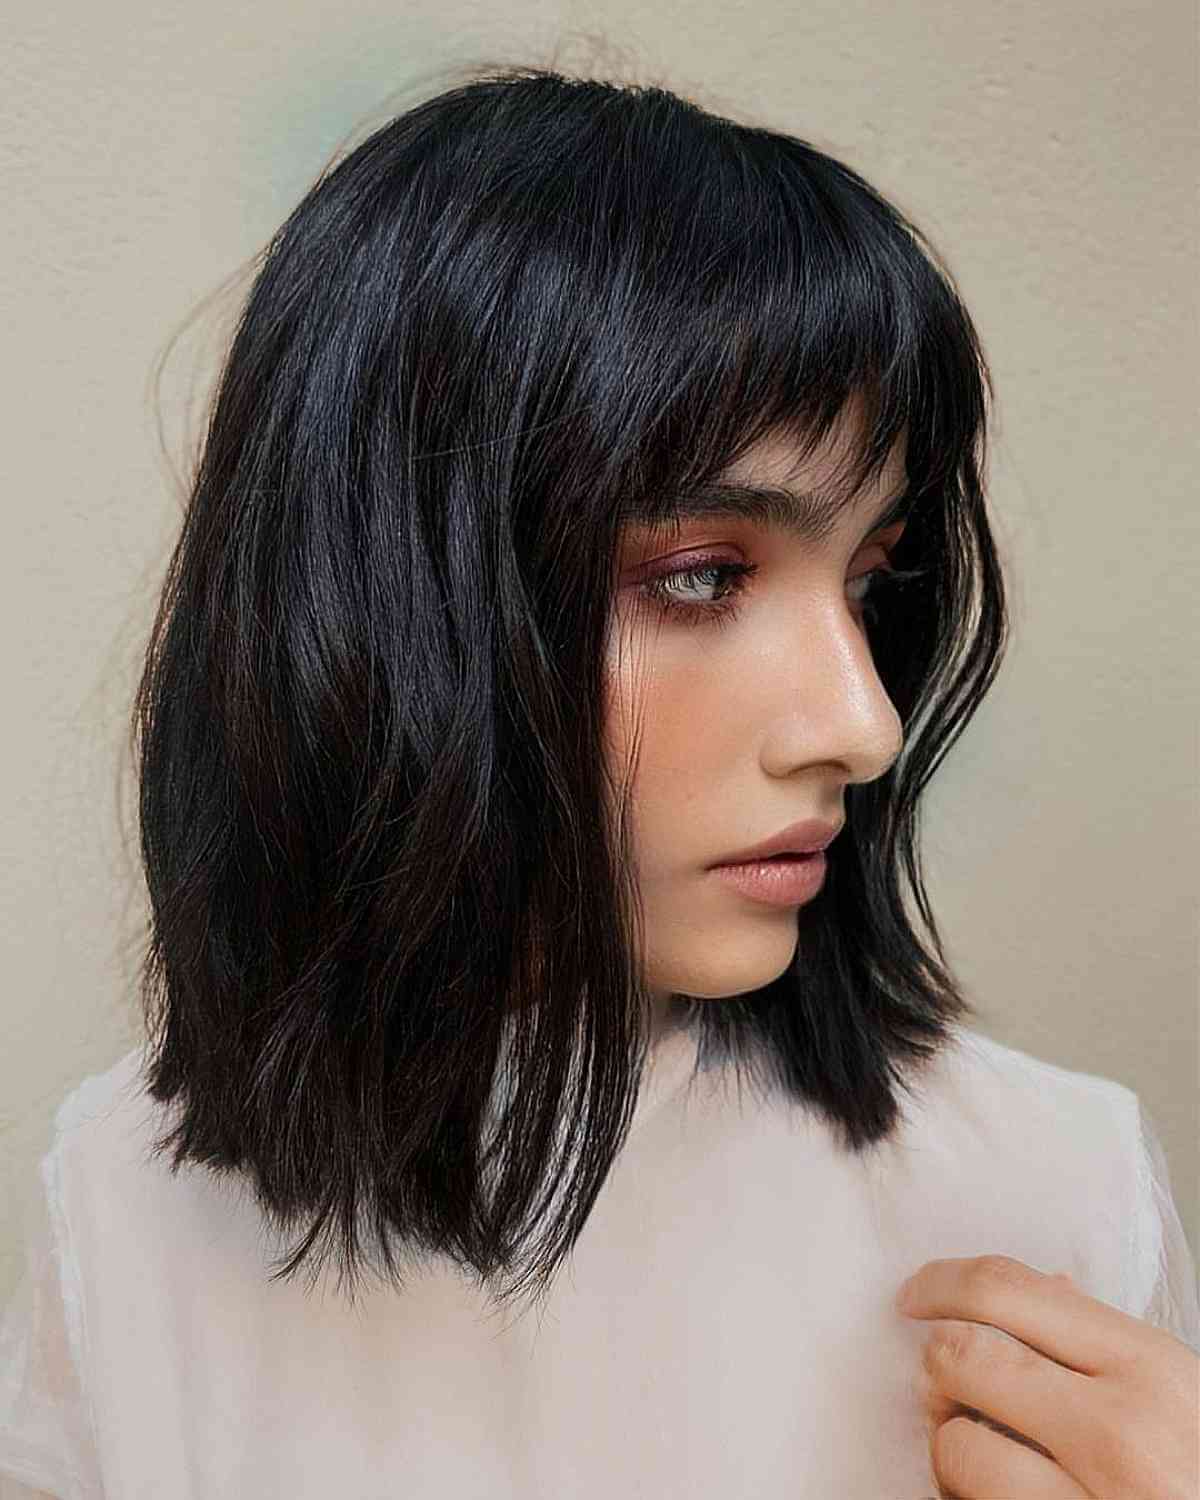 Jet Black Textured Layers and Choppy Bangs